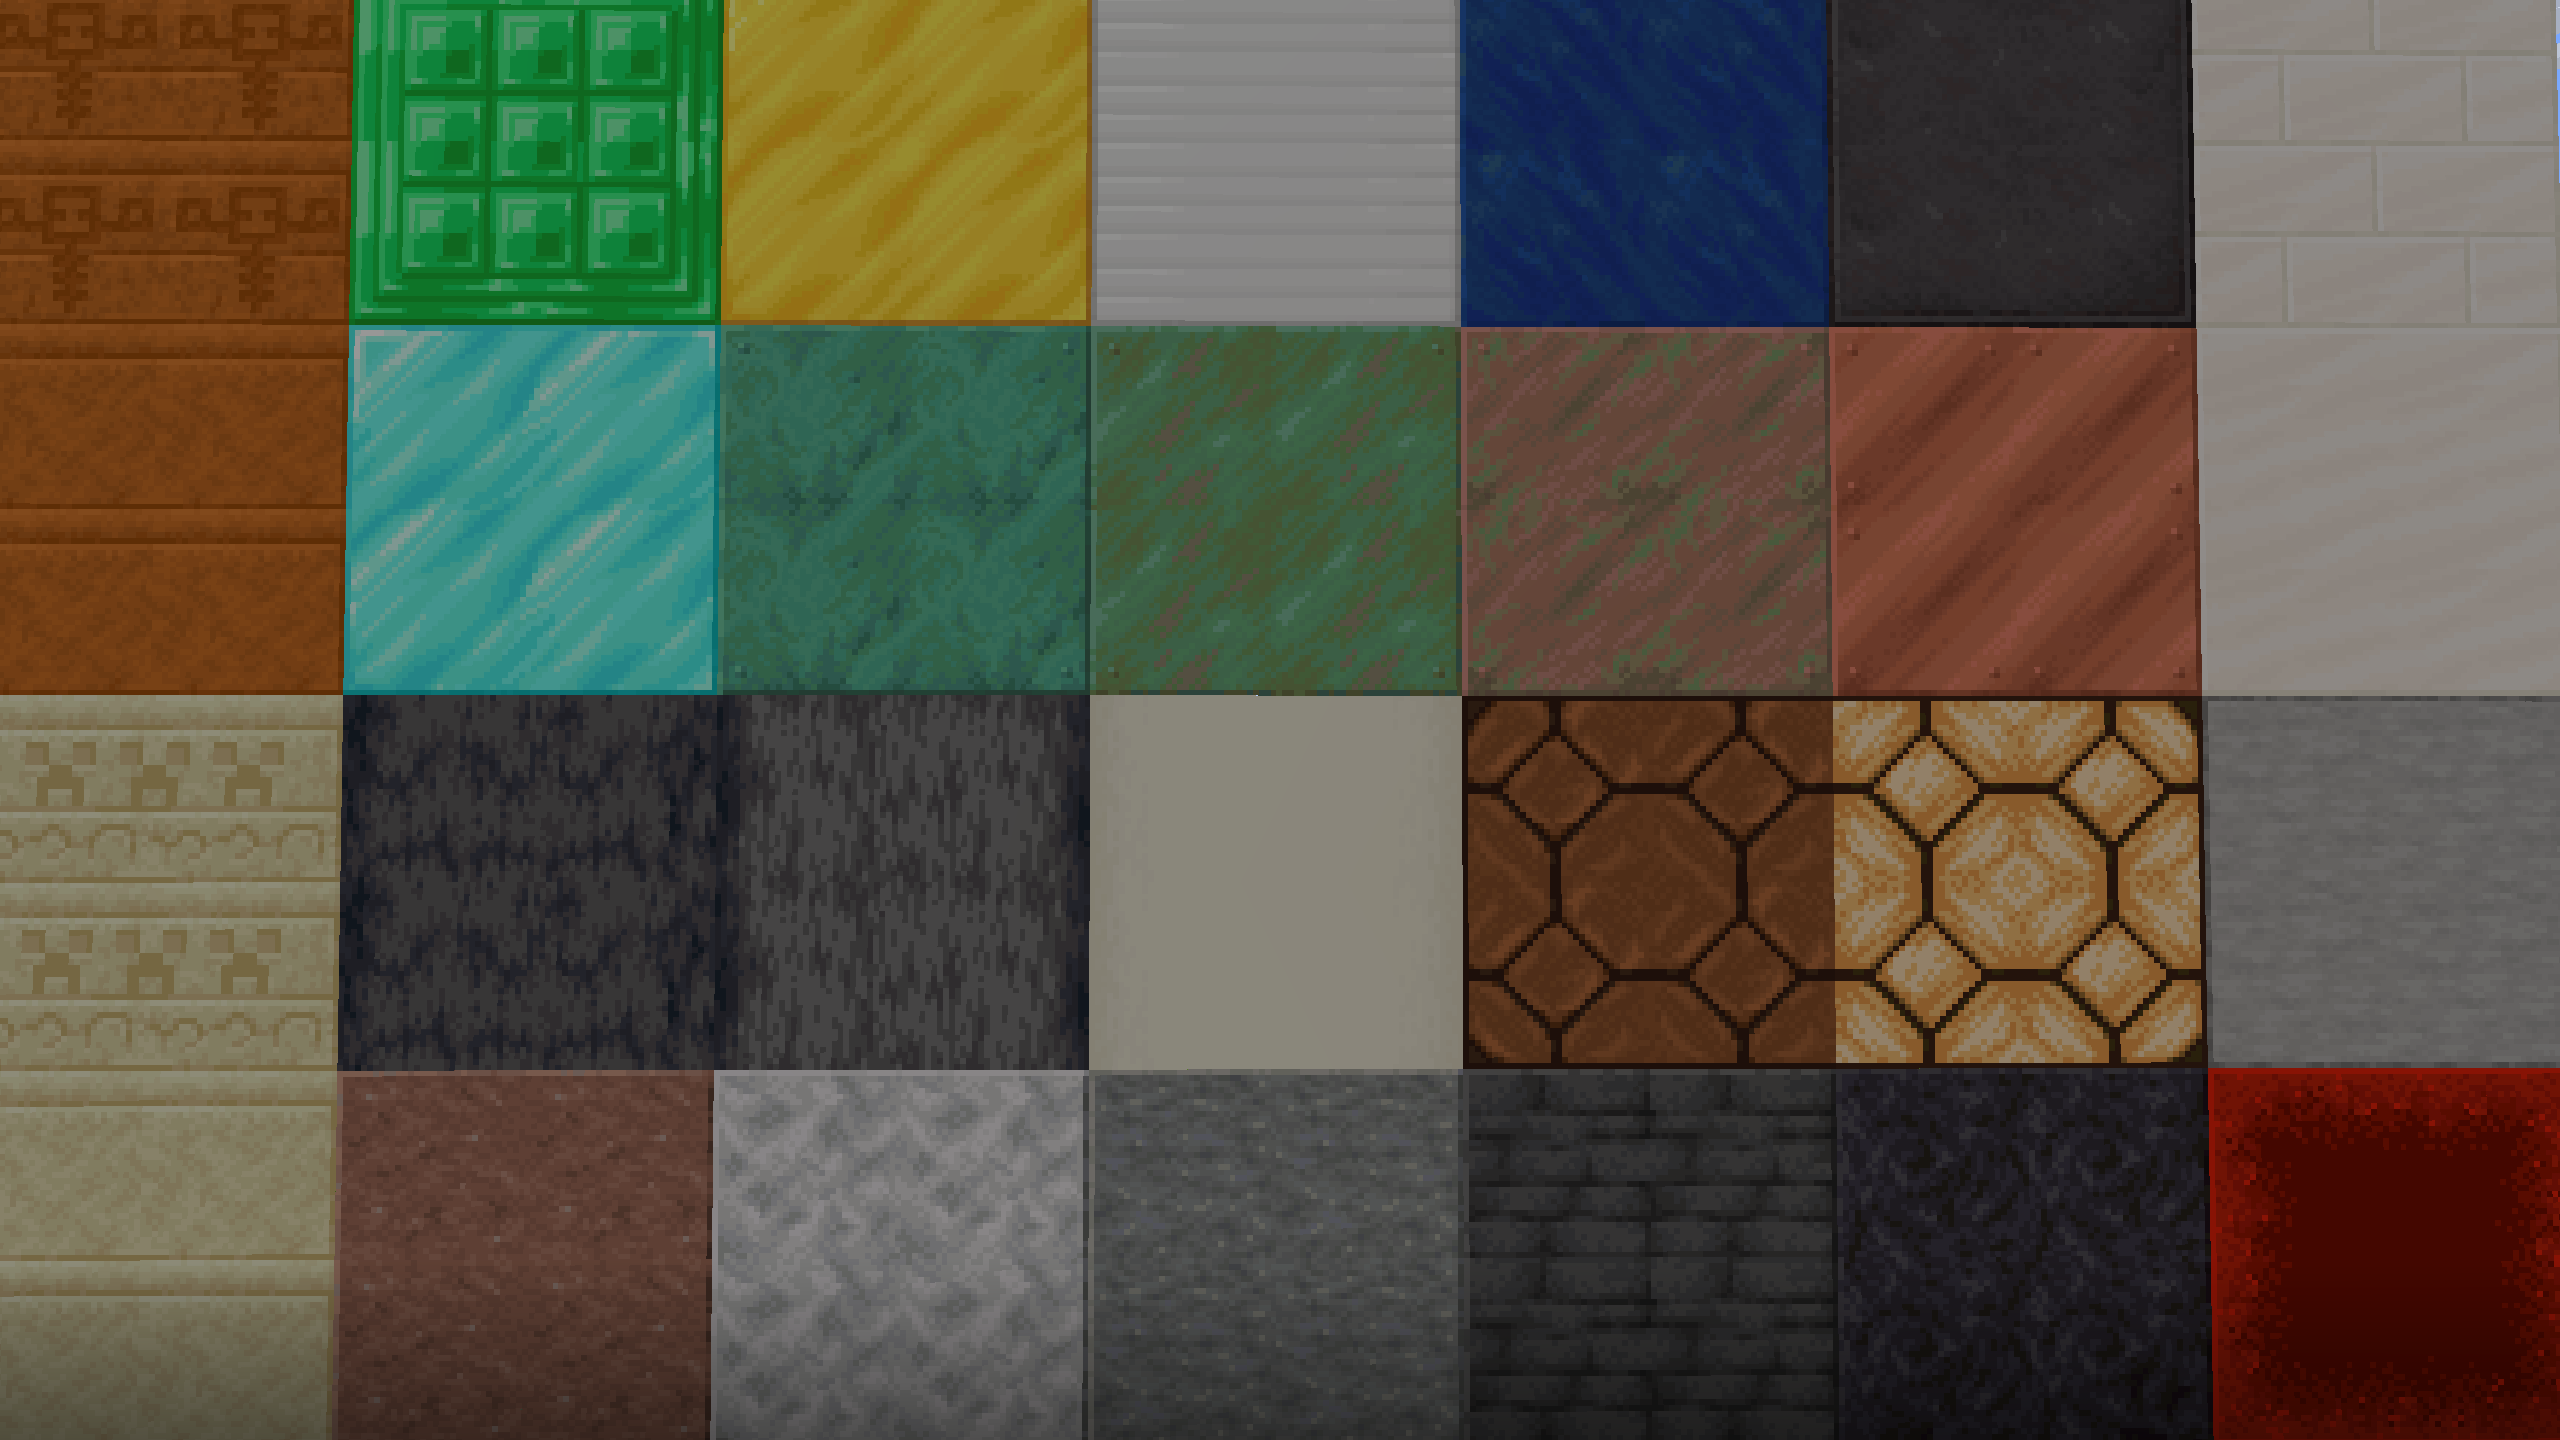 CTM and Chisel Mod Update breaks Faithful32 connected textures for